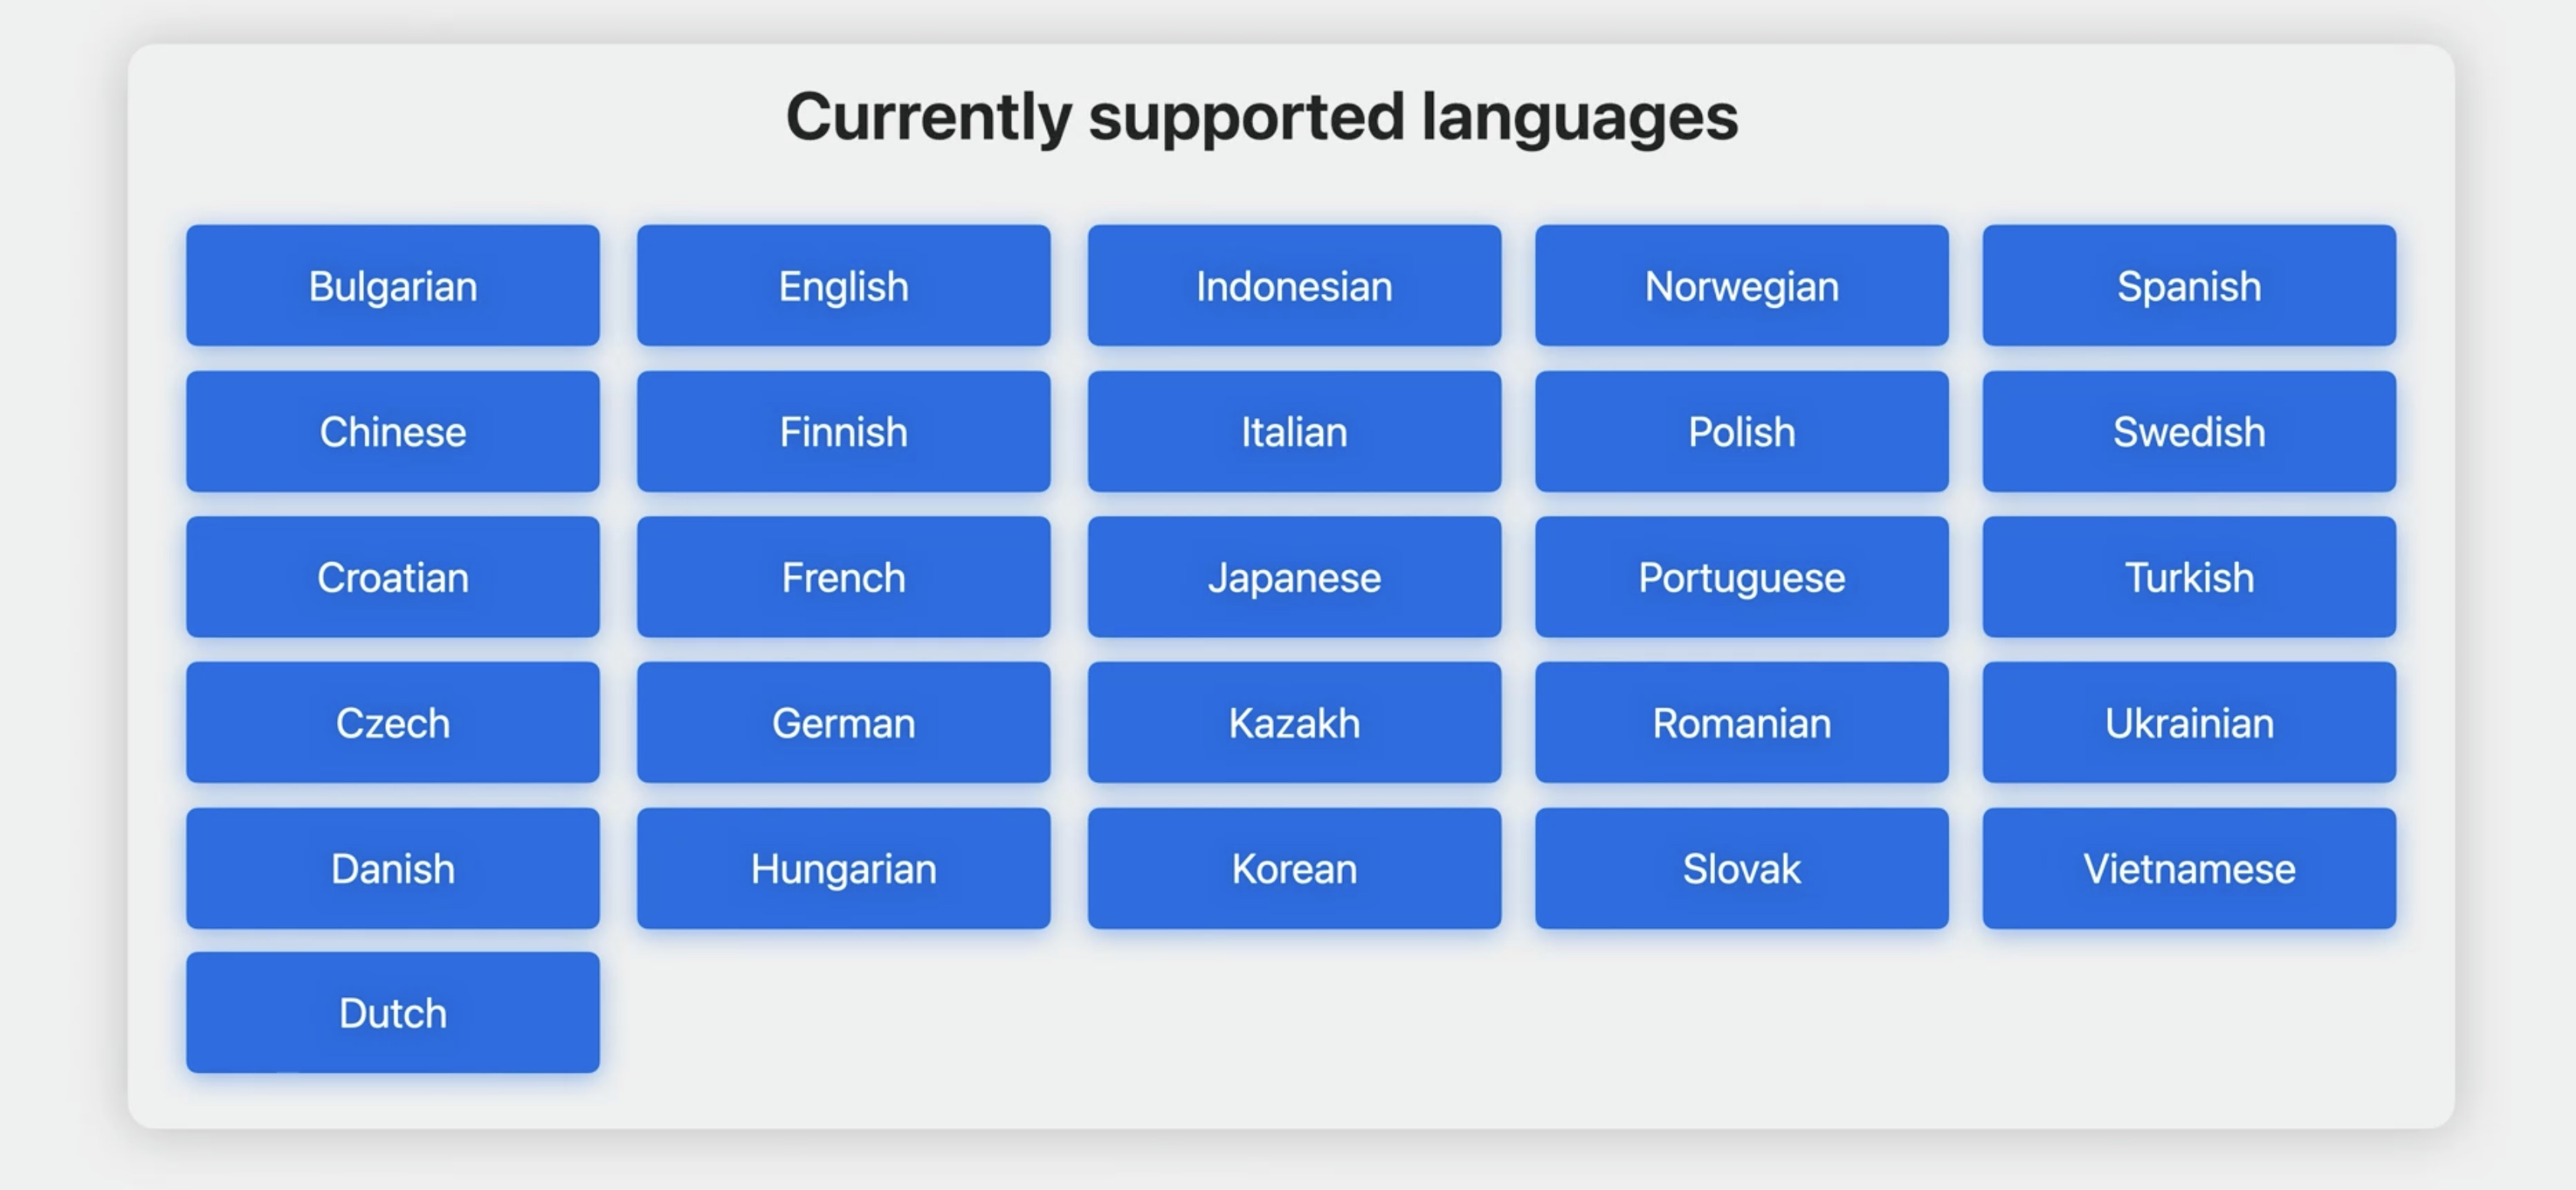 Currently supported languages